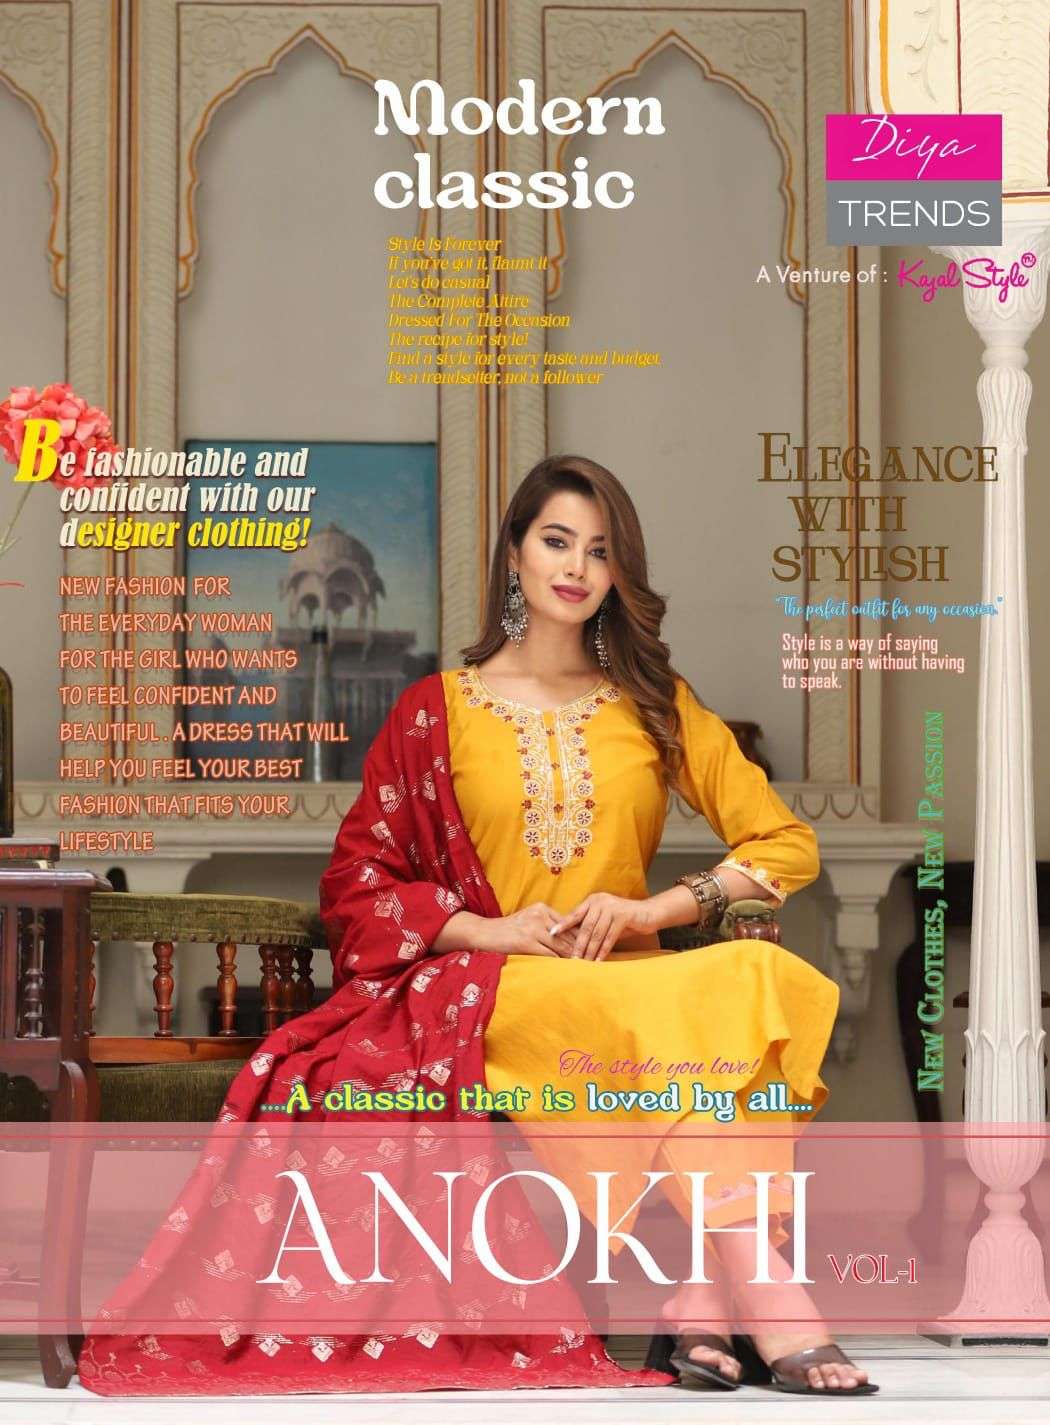 ANOKHI VOL 1 HEAVY MASLIN FANCY EMBROIDERY WORK KURTI WITH PANT  AND JACQUARD DUPATTA BY DIYA TRENDS...